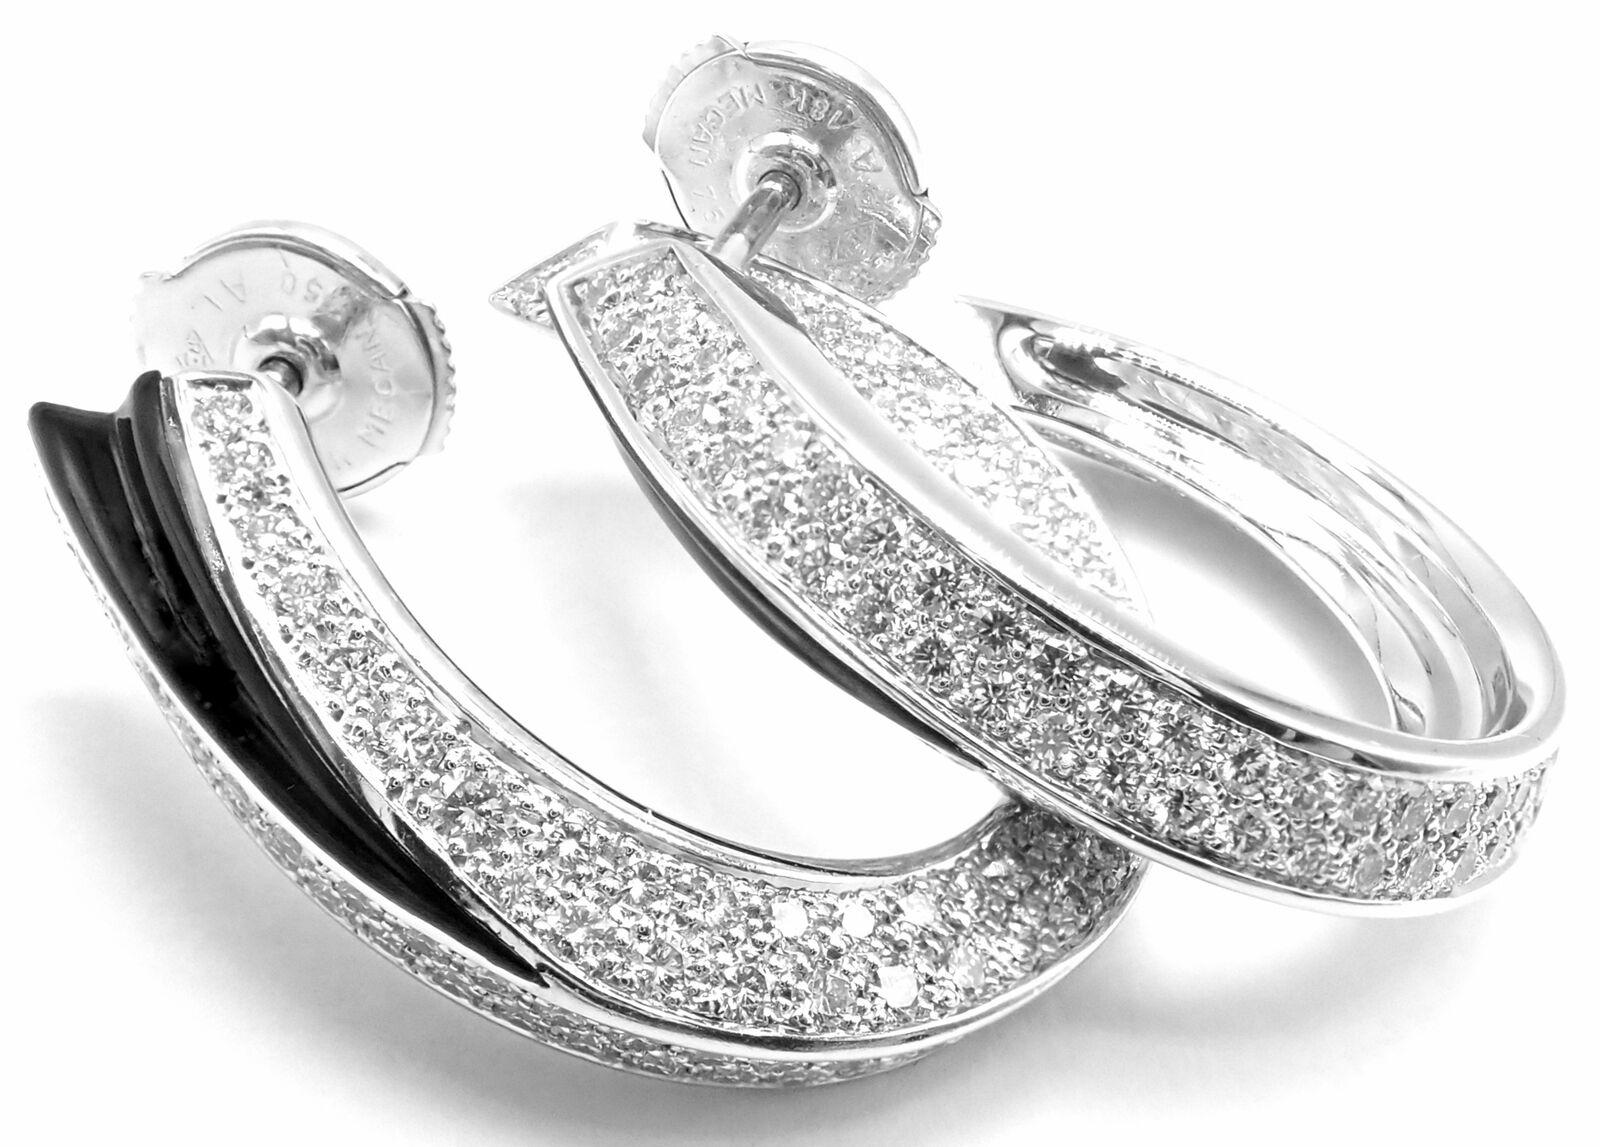 18k White Gold Panthere Diamond And Onyx Hoop Earrings by Cartier. 
With Round Brilliant Cut Diamonds VVS1 clarity, E color total weight approximately 5ct
***Earrings are made for pierced ears
Details:
Measurements: 26mm x 23mm
Weight: 12.9